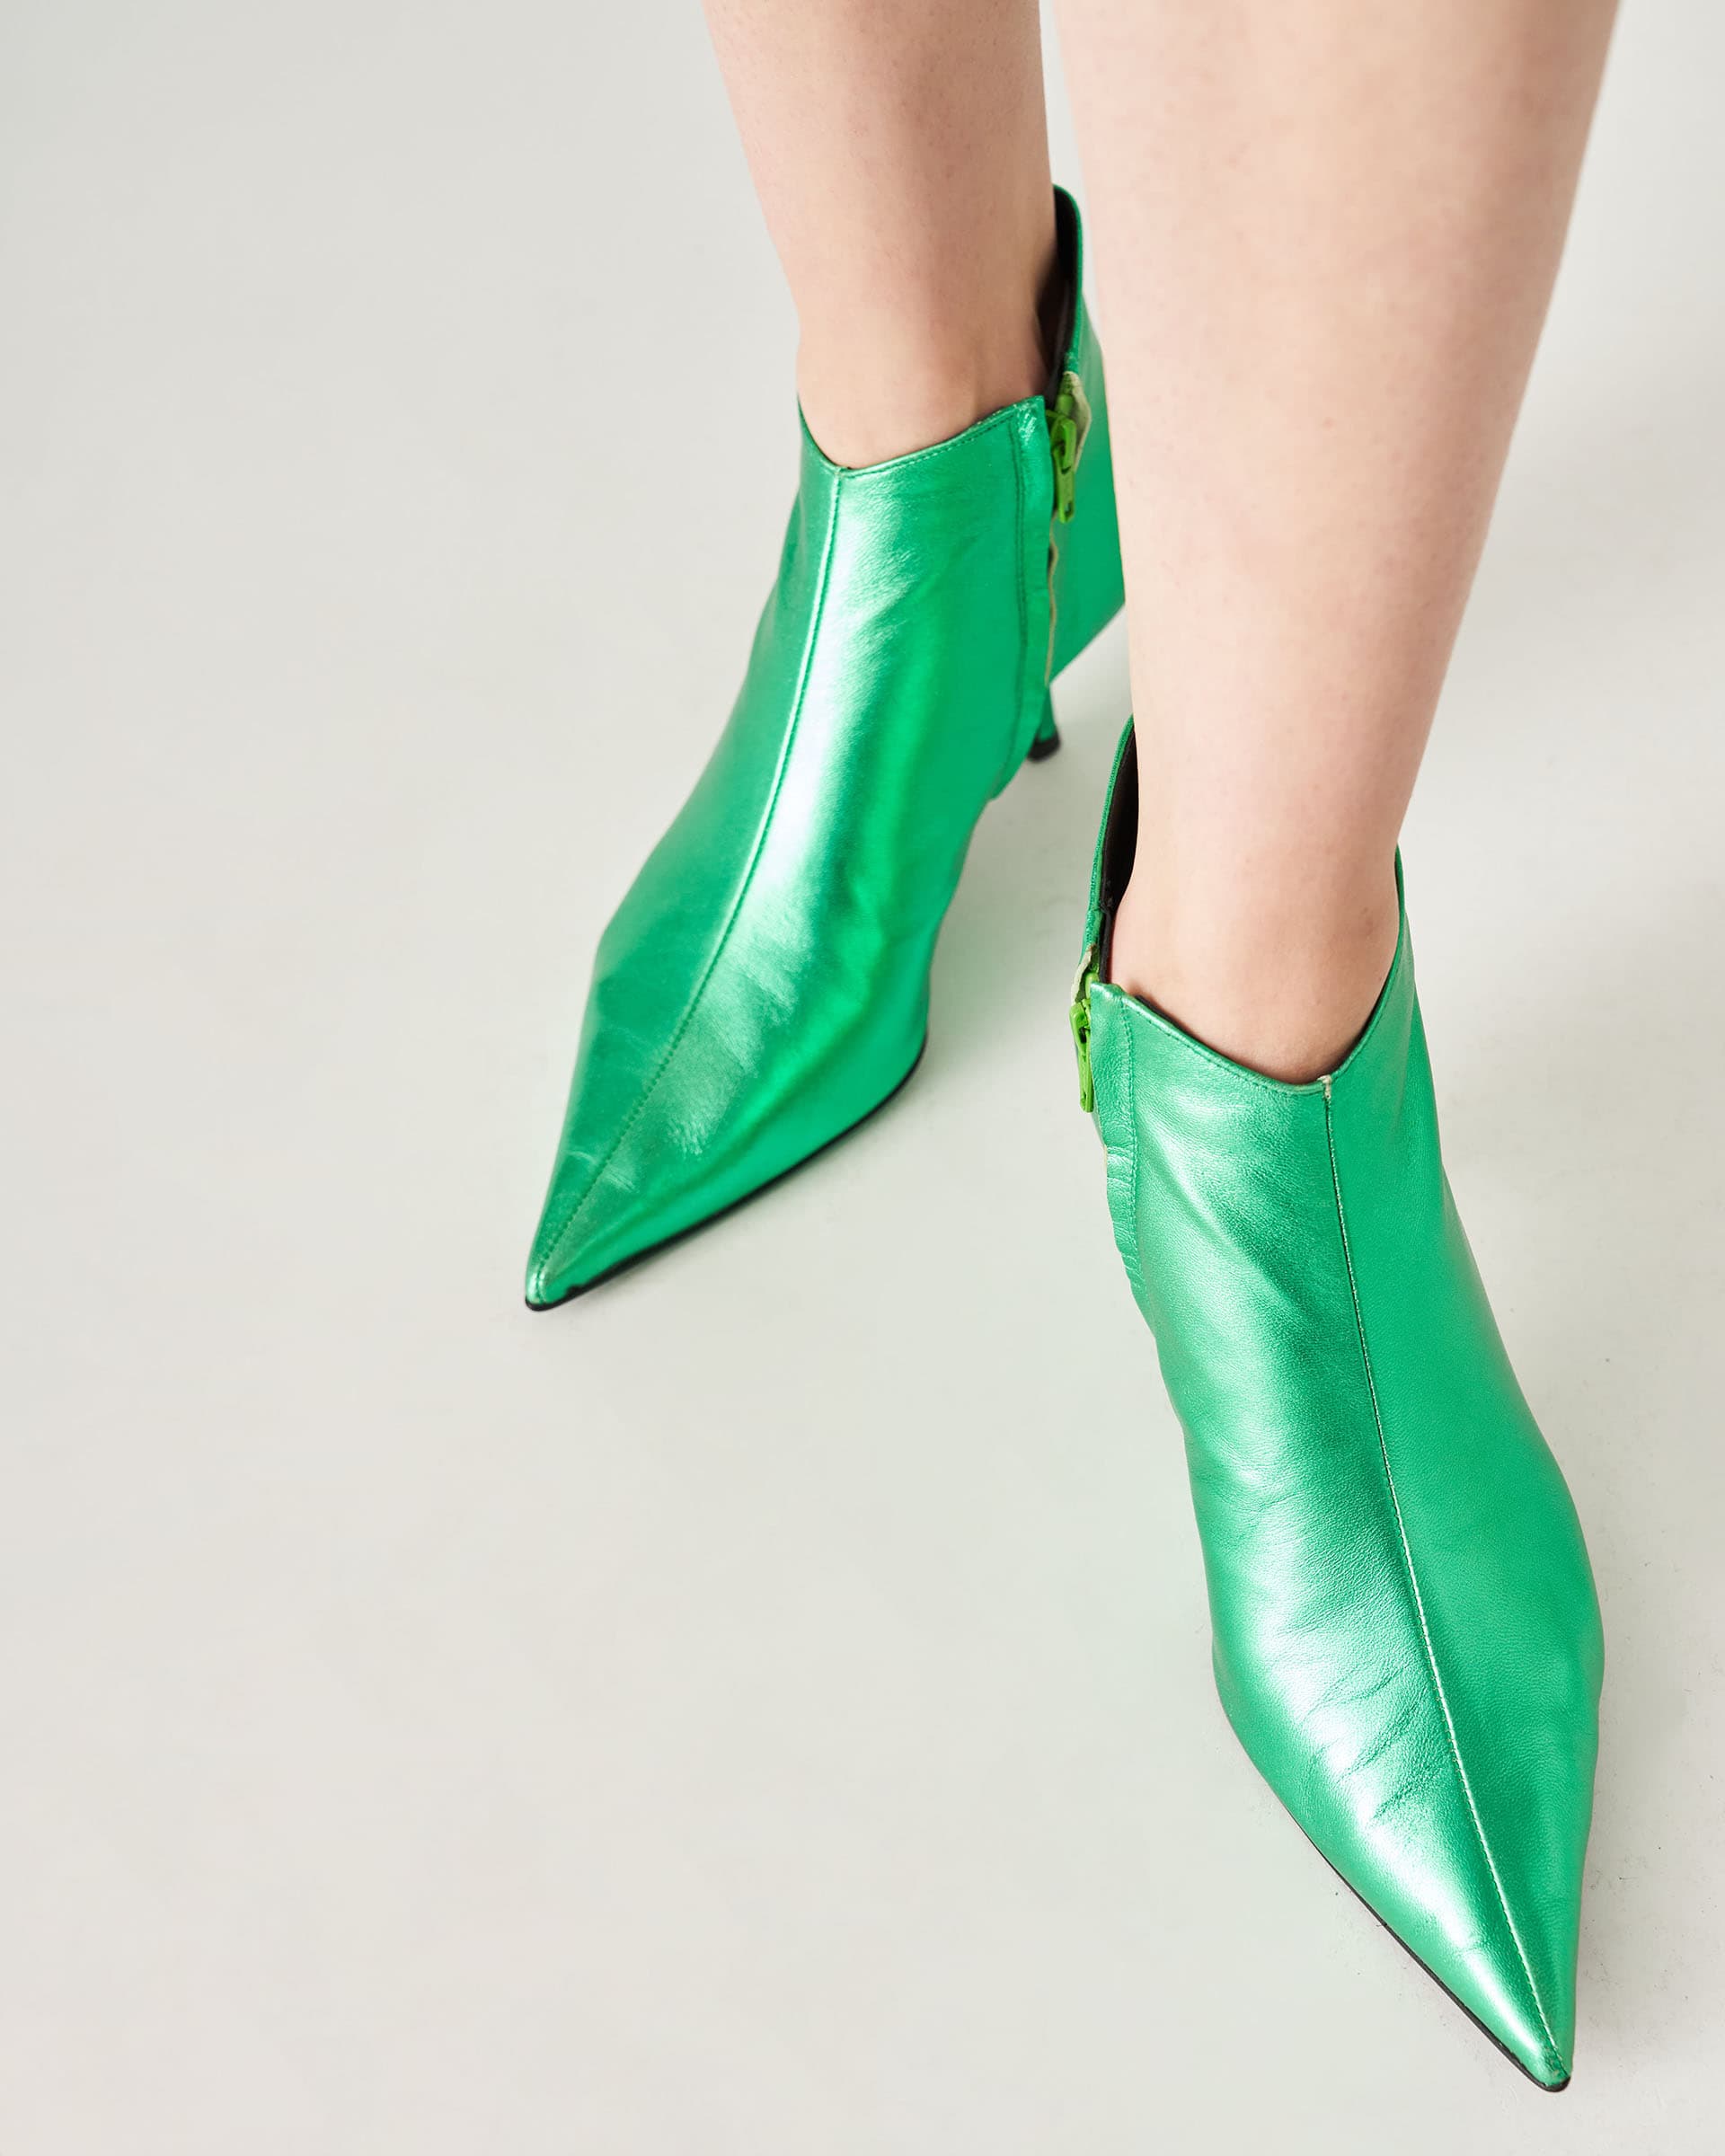 The Market Store | Ankle Boots